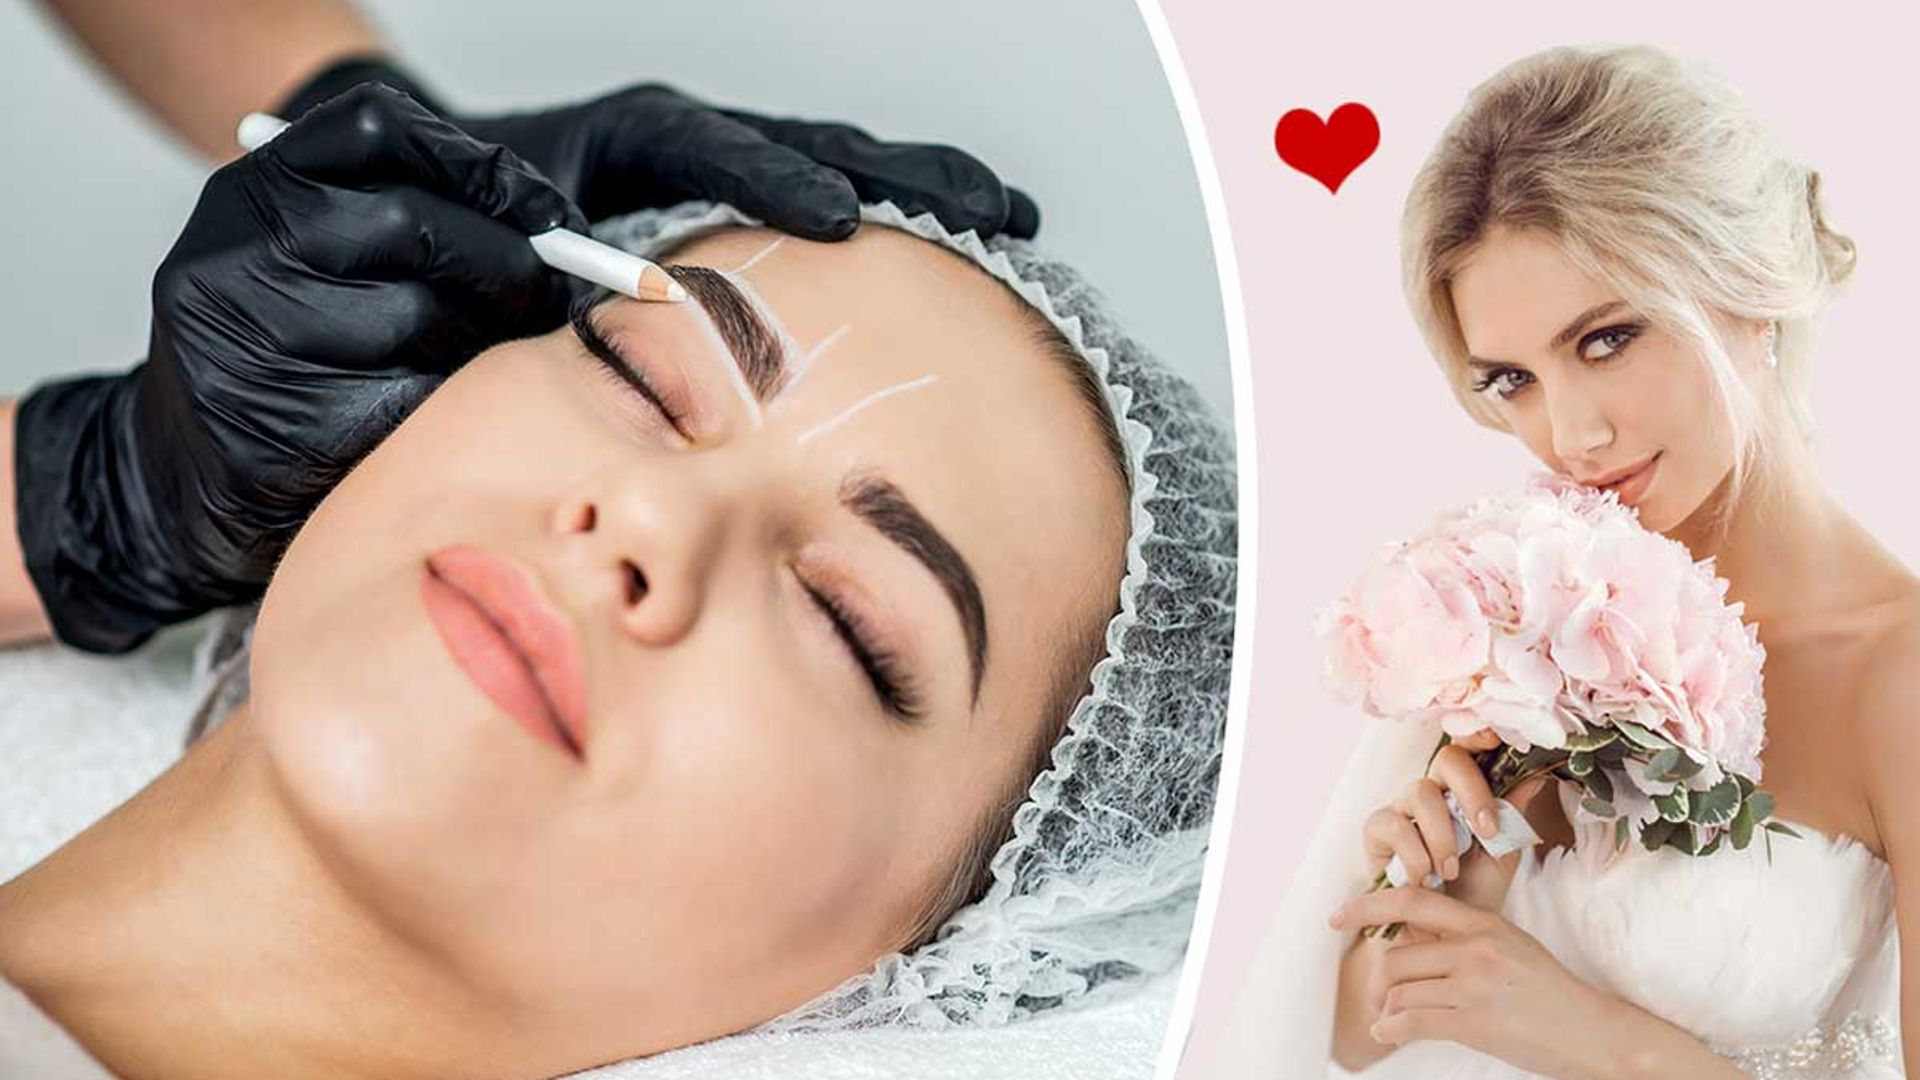 When should you get your eyebrows done before your wedding day? We asked the experts to find out